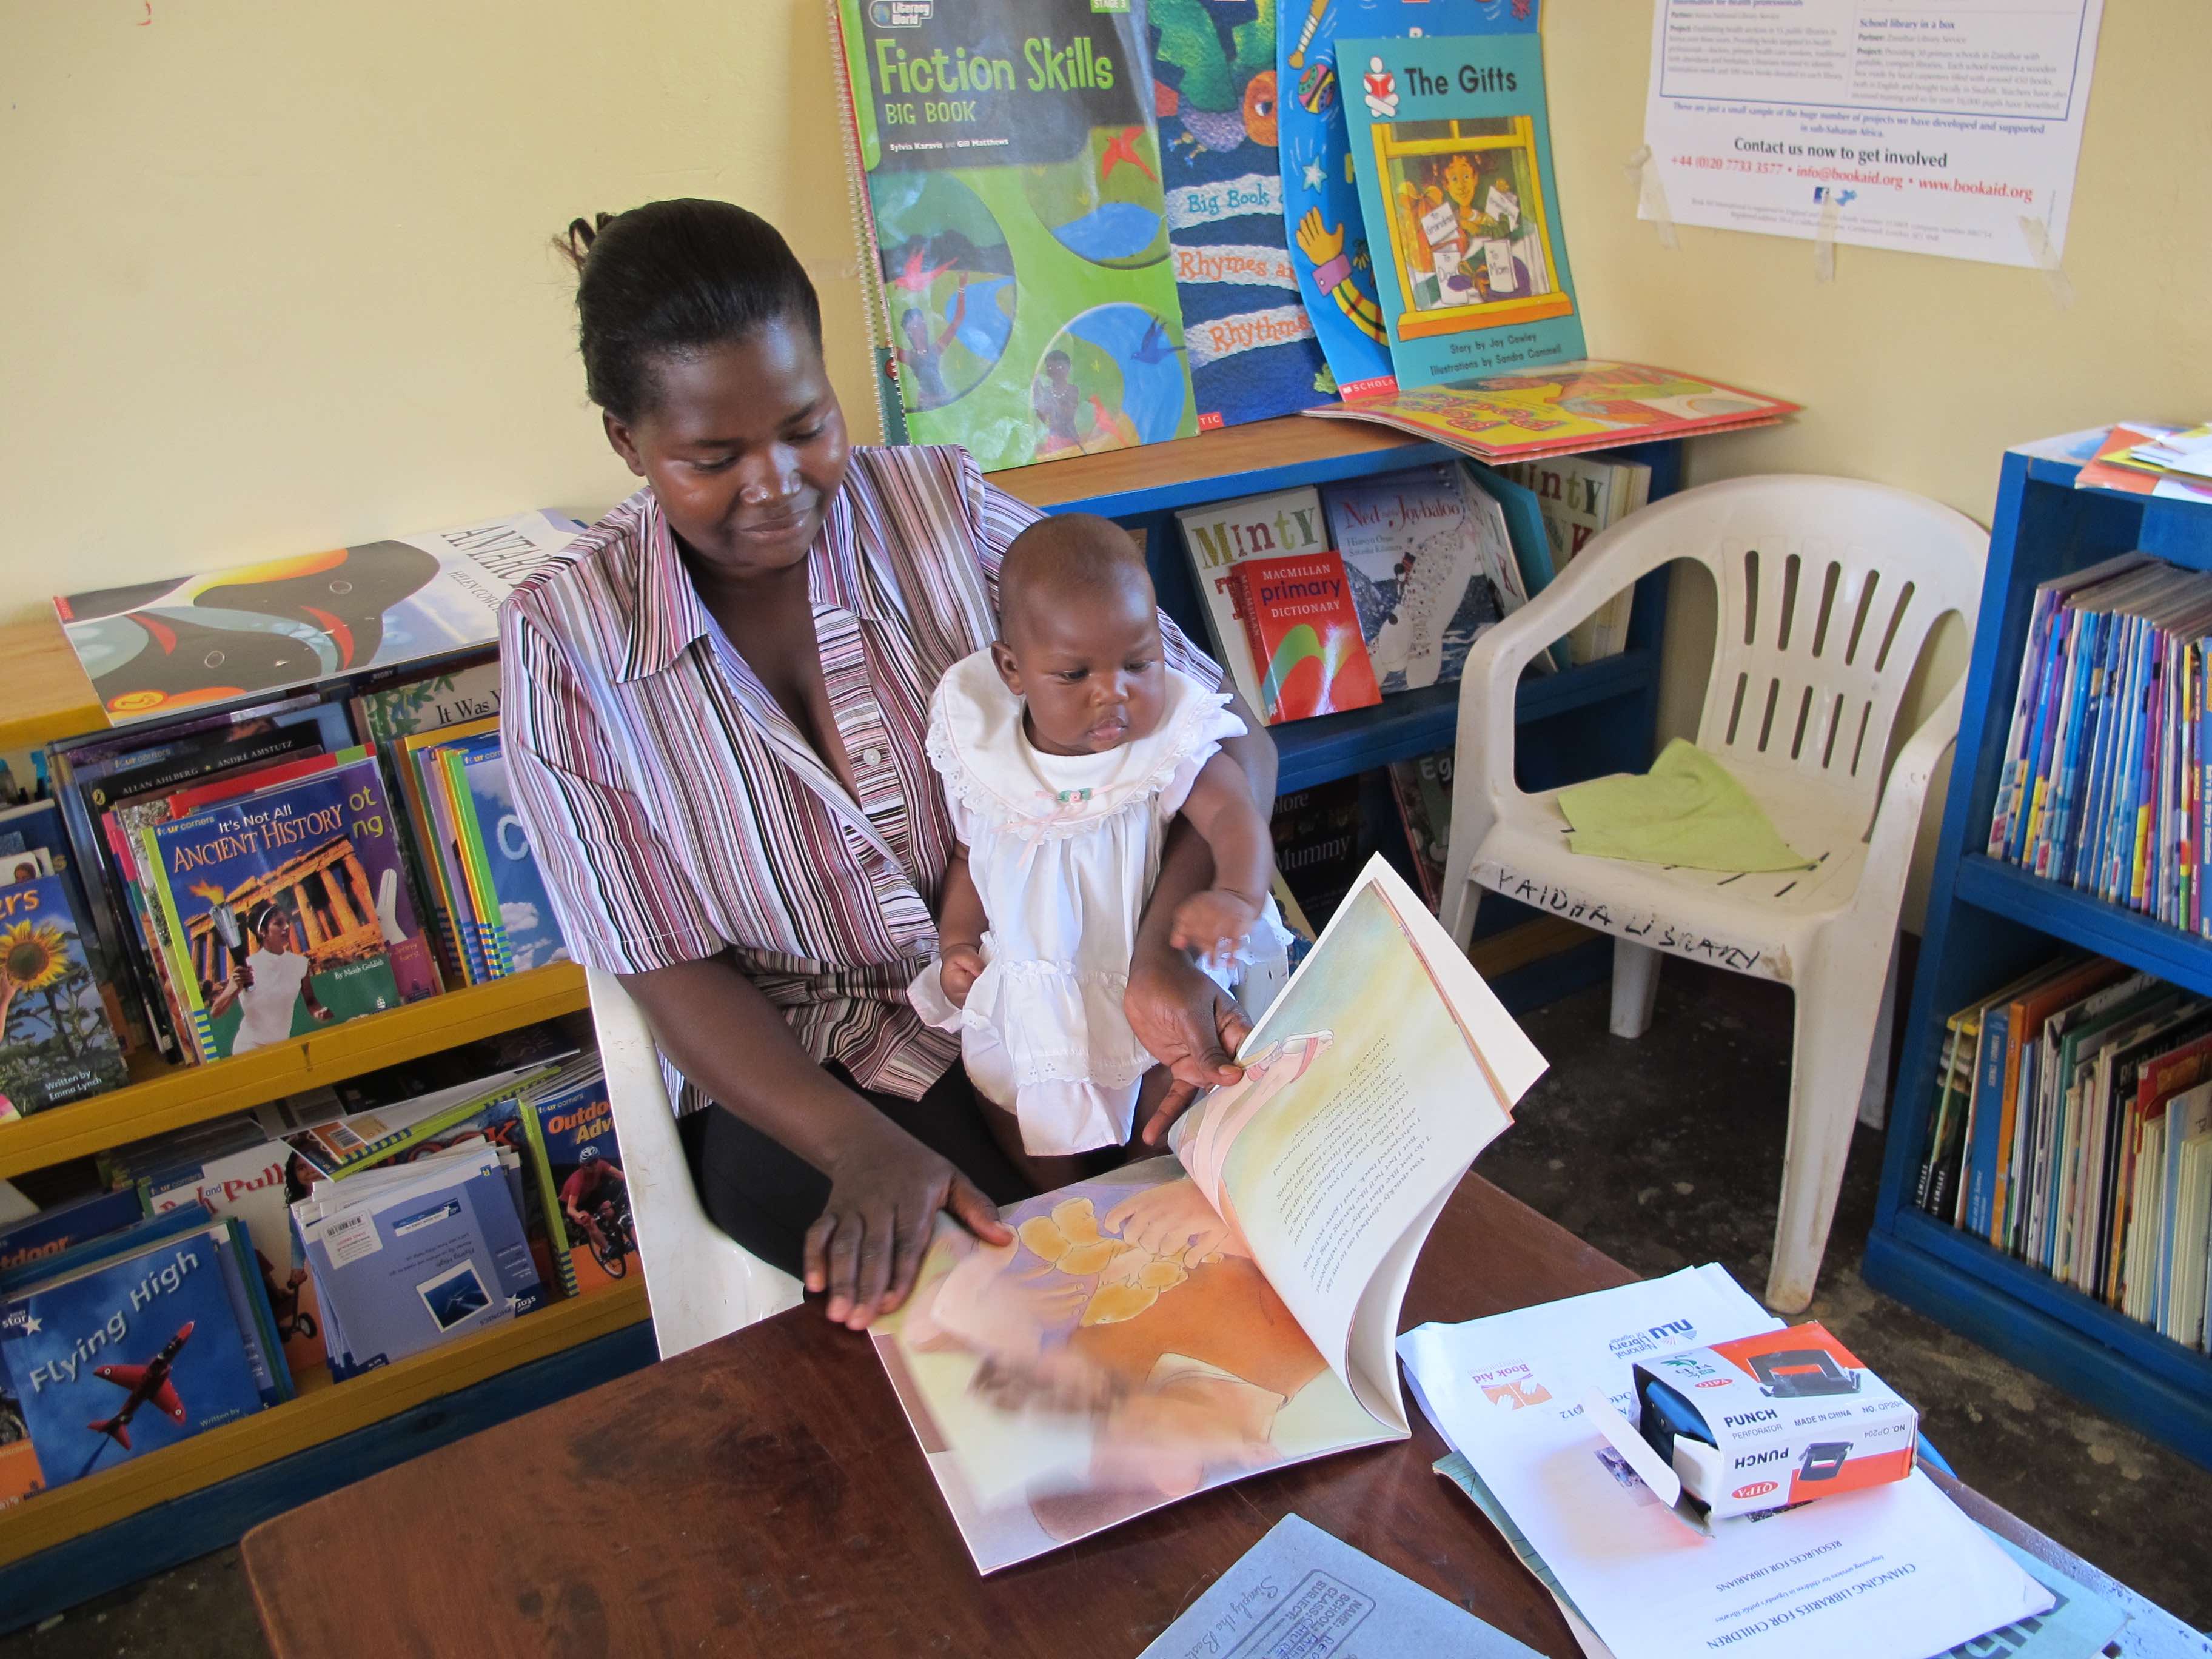 A toddler sits on the lap of an adult in the children’s reading room at the National Library of Uganda. The adult is paging through a picture book, while the child looks at the pictures. The library shelves behind the adult and against the walls are stacked with colourful picture books.